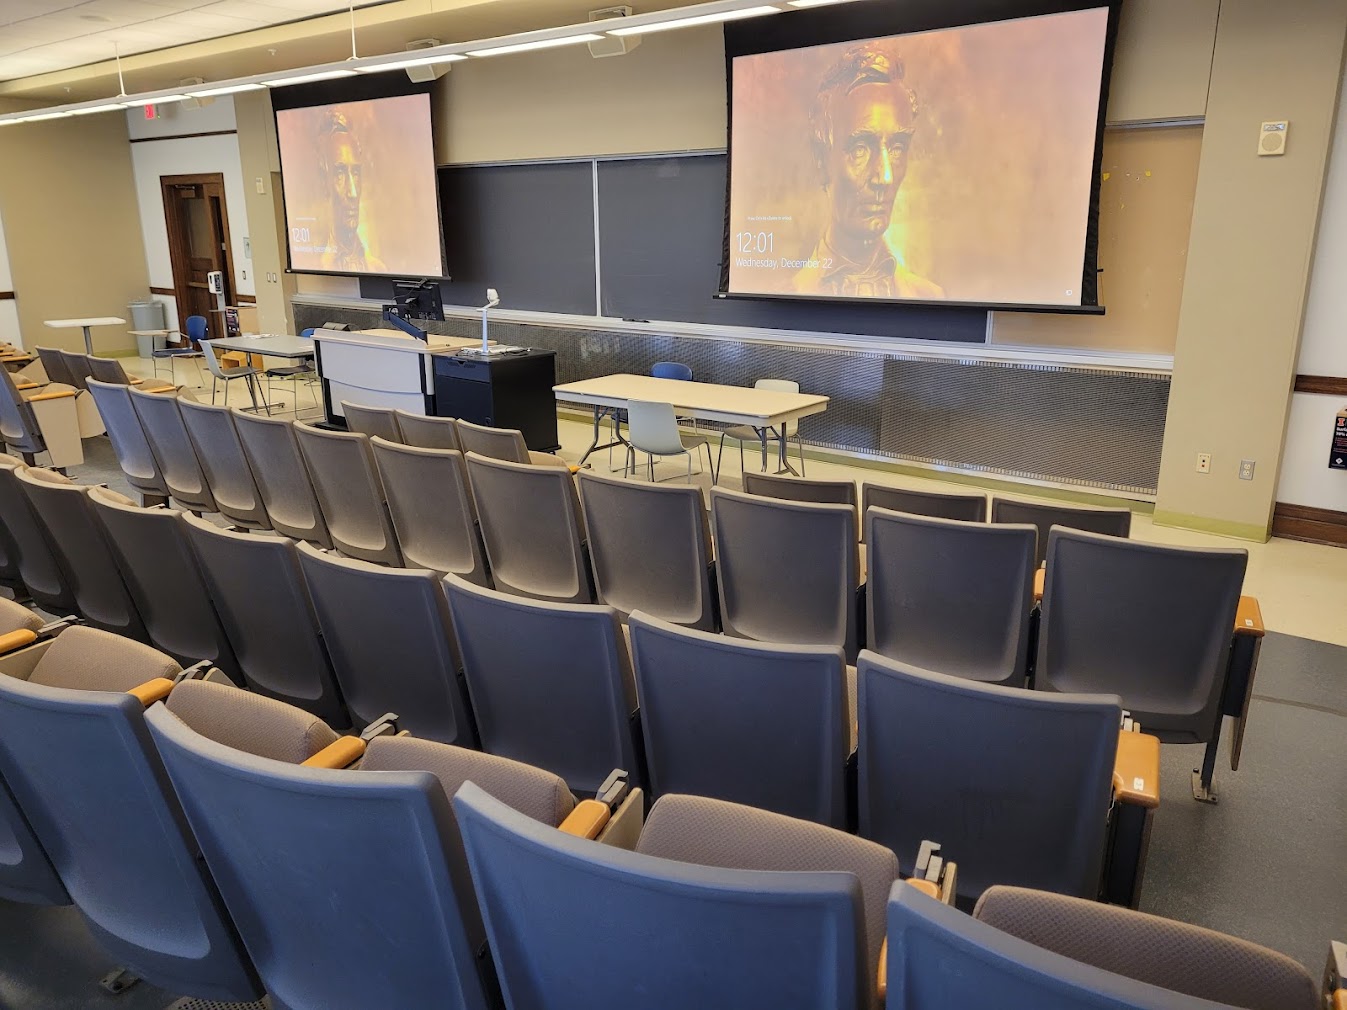 A view of the classroom with theatre auditorium seating, chalkboard, and instructor table in front.